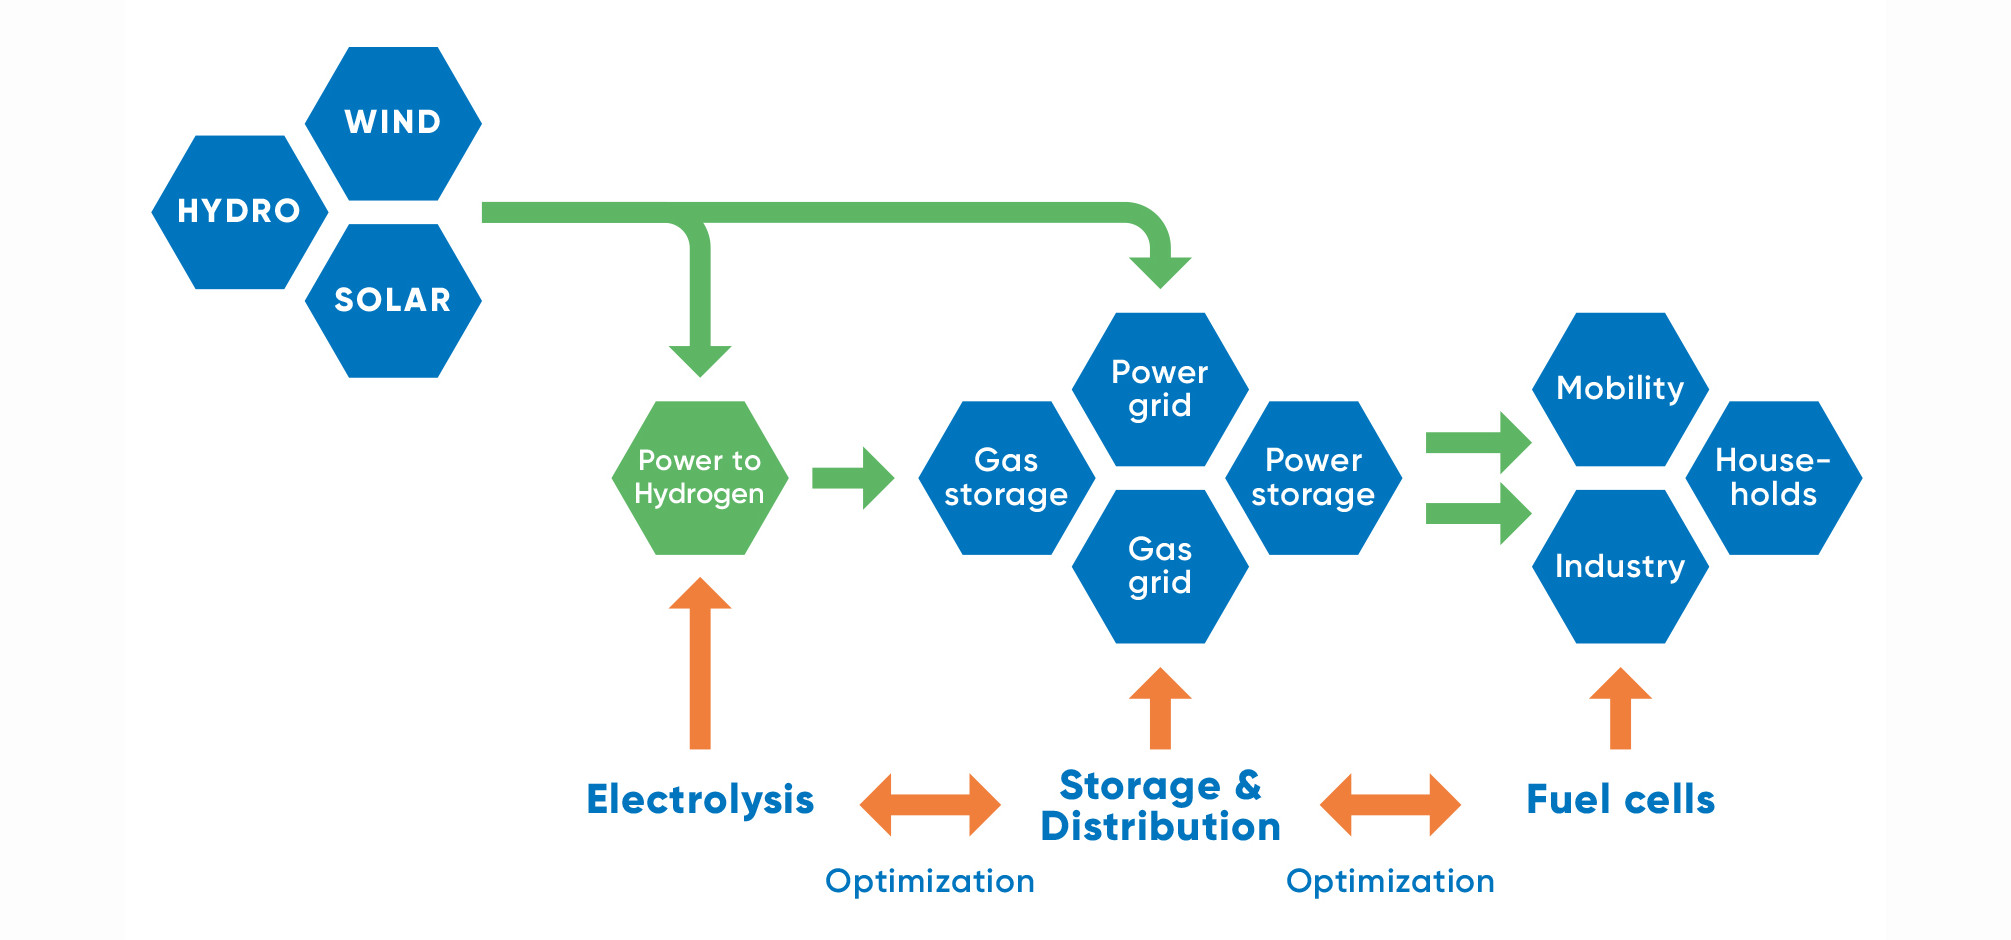 Energy- and cost-efficient technologies